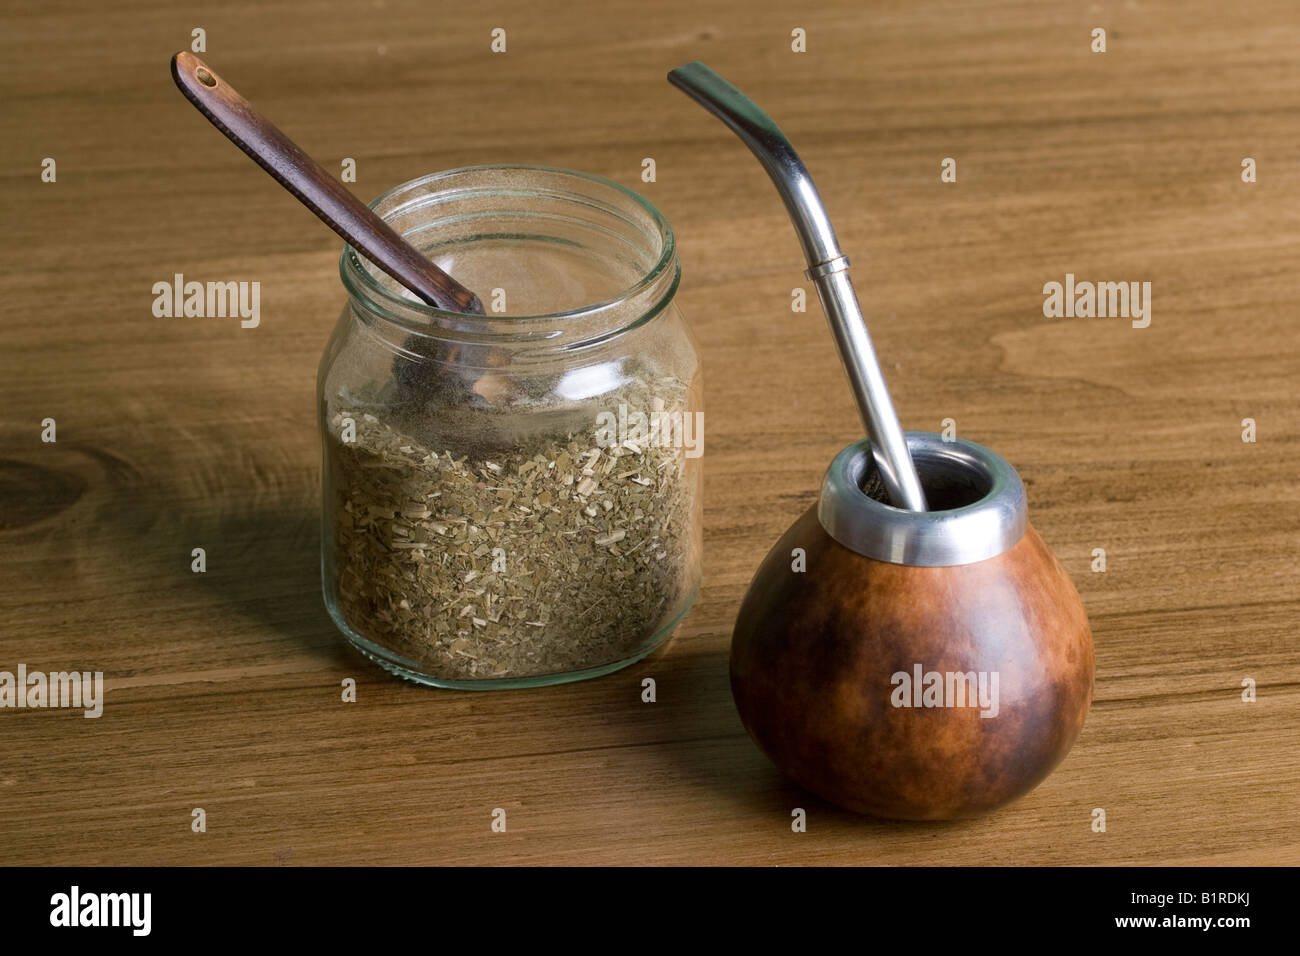 Wooden Mate Gourd Cup, Yerba Mate Gourd, Mate, Bombilla , Yerba Mate Cup 